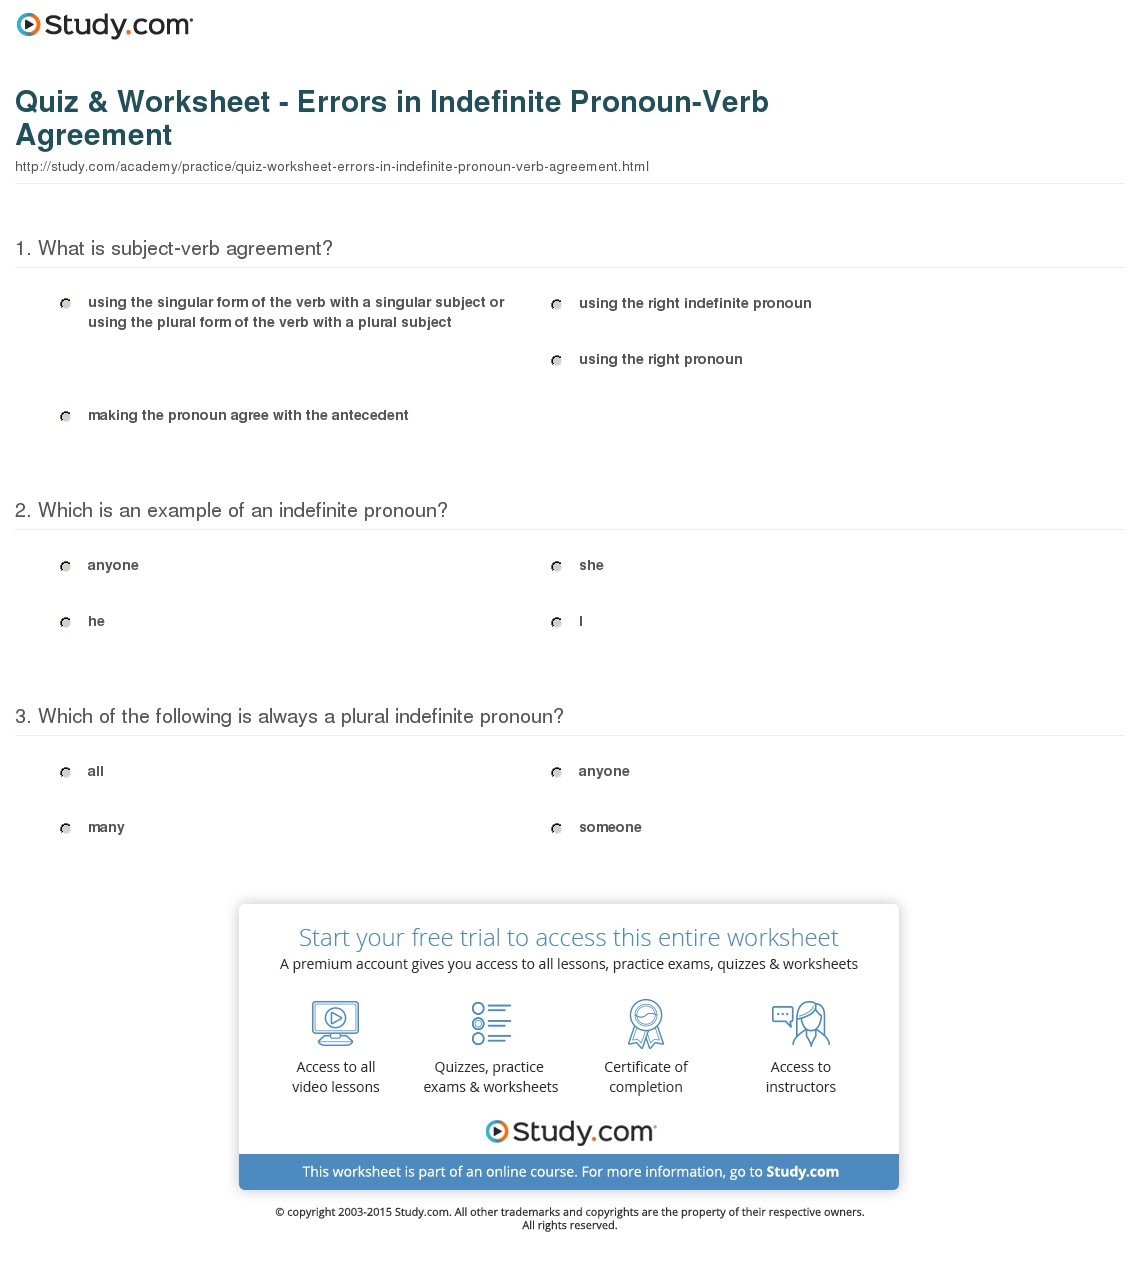 Subject Verb Agreement For Indefinite Pronouns Quiz Worksheet Errors In Indefinite Pronoun Verb Agreement